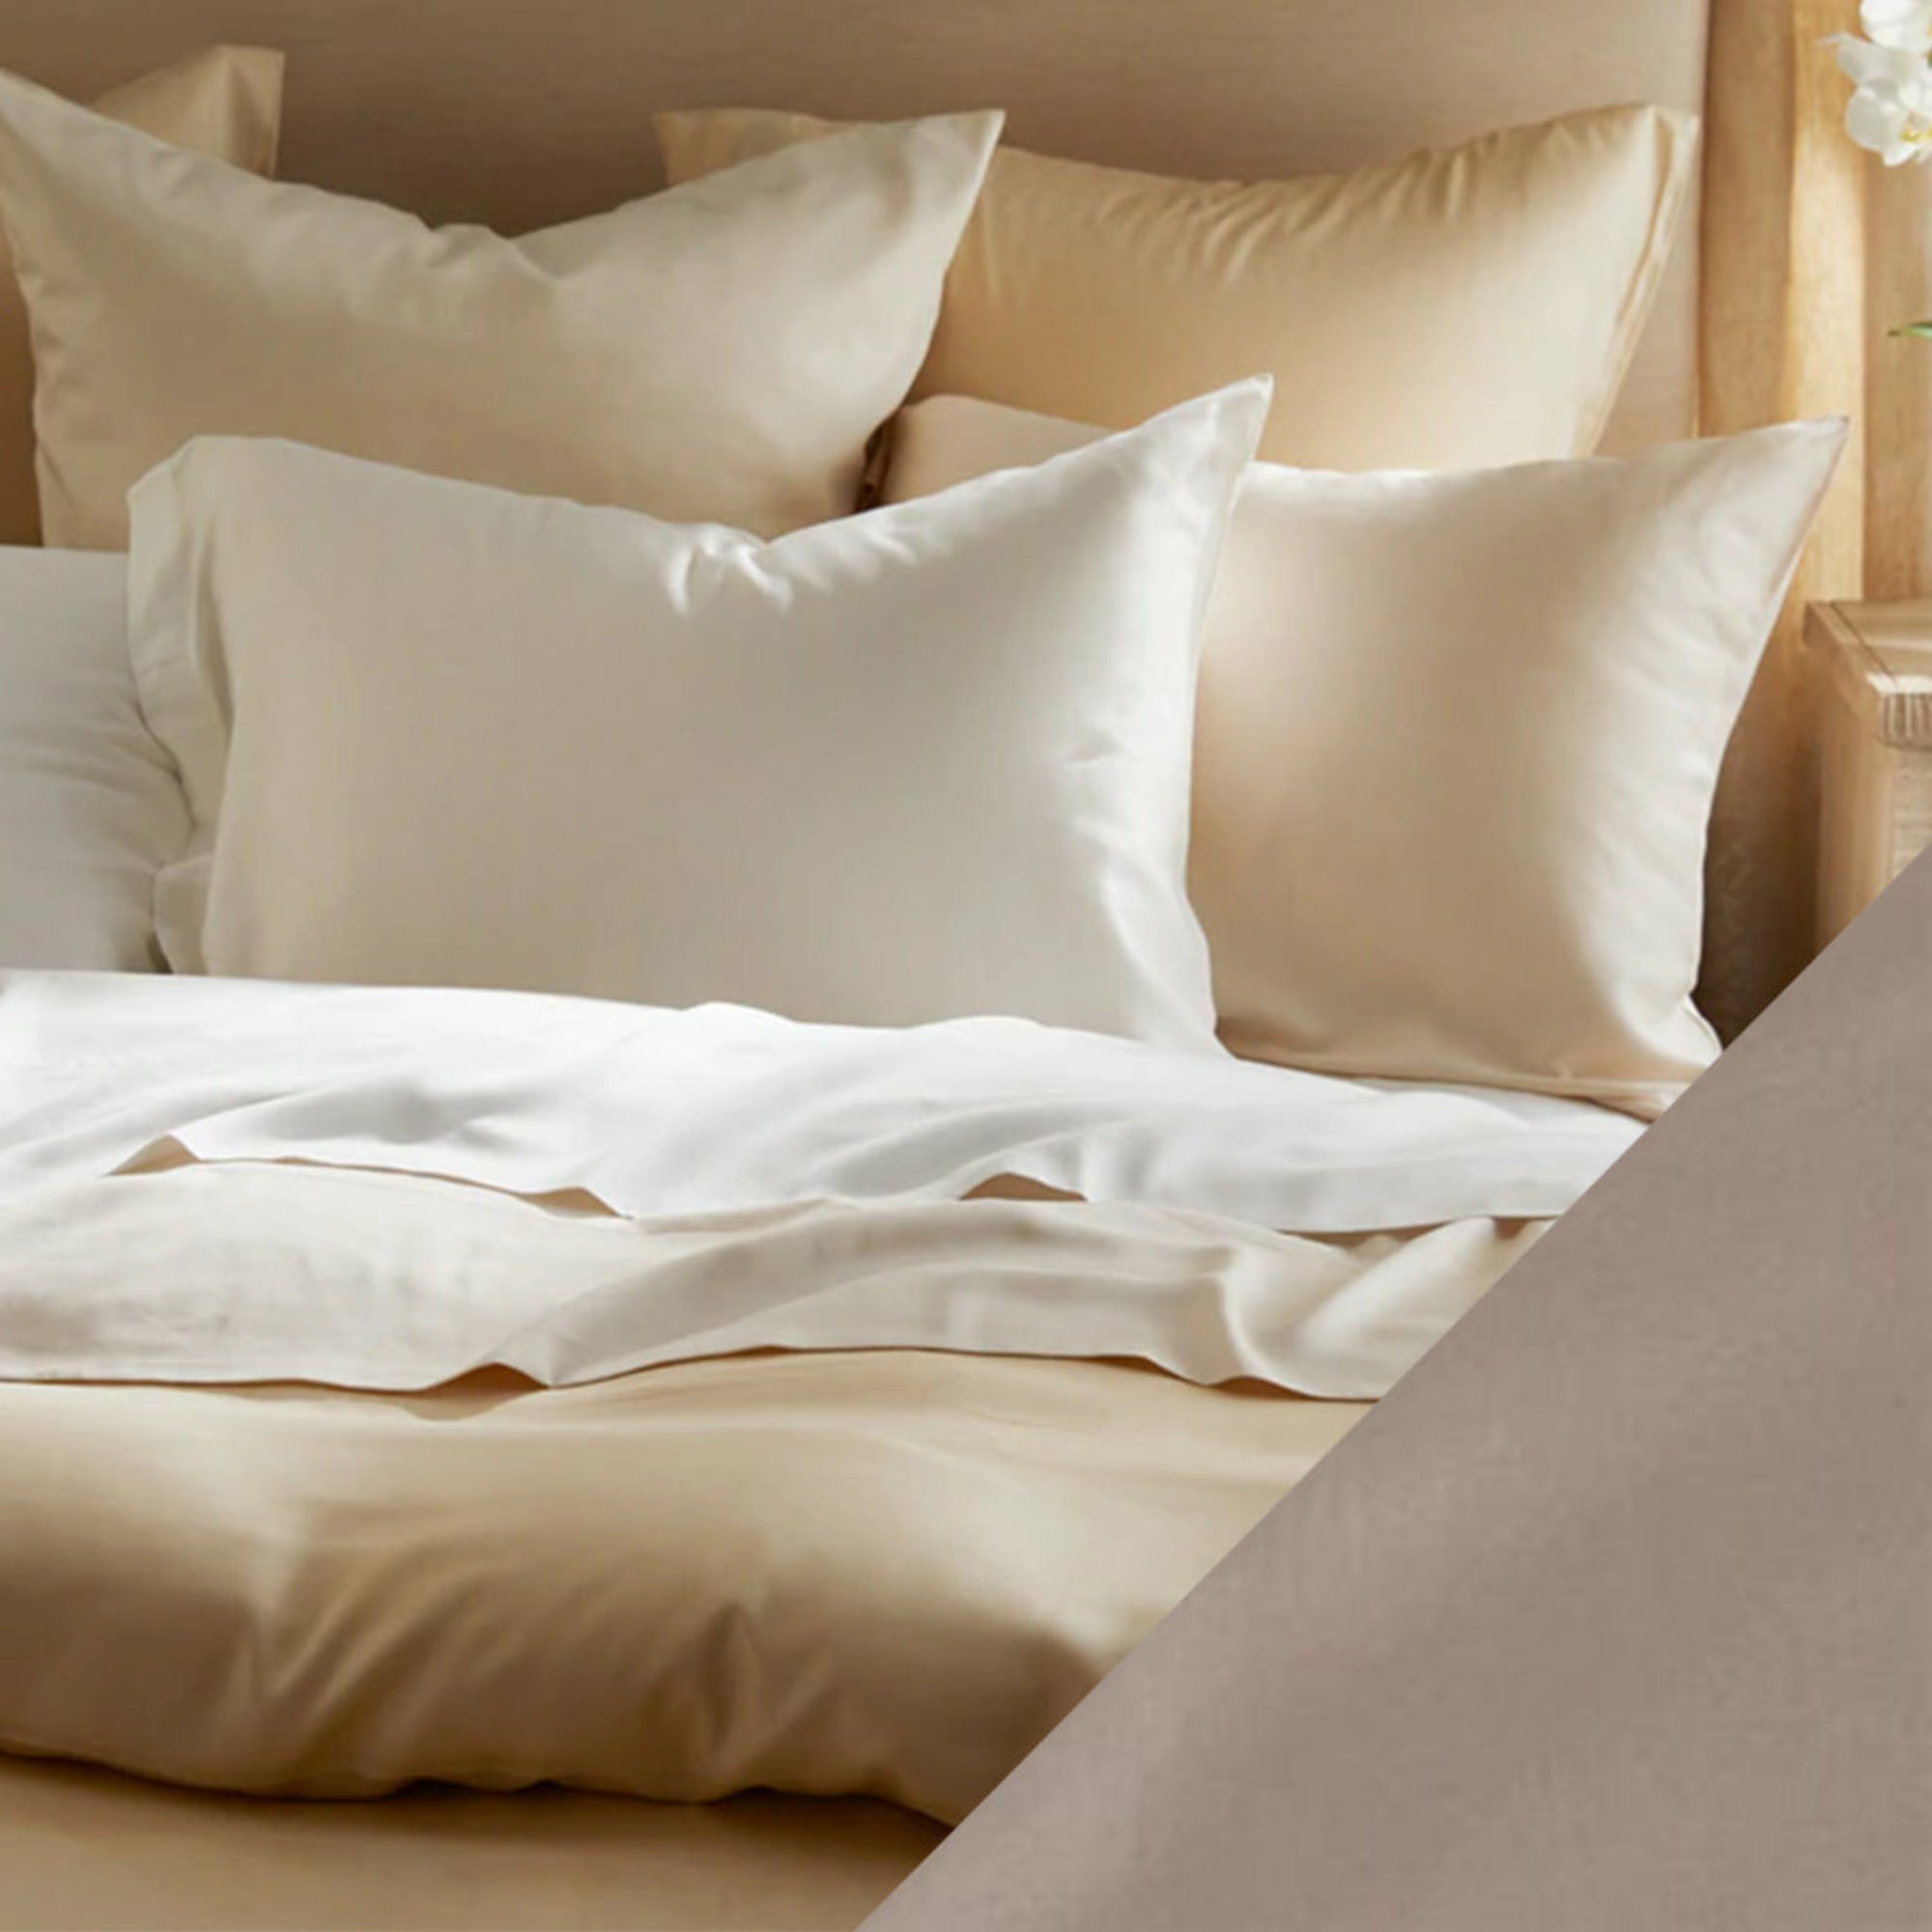 Main Lifestyle of SDH Legna Classic Bedding with Swatch of Mushroom